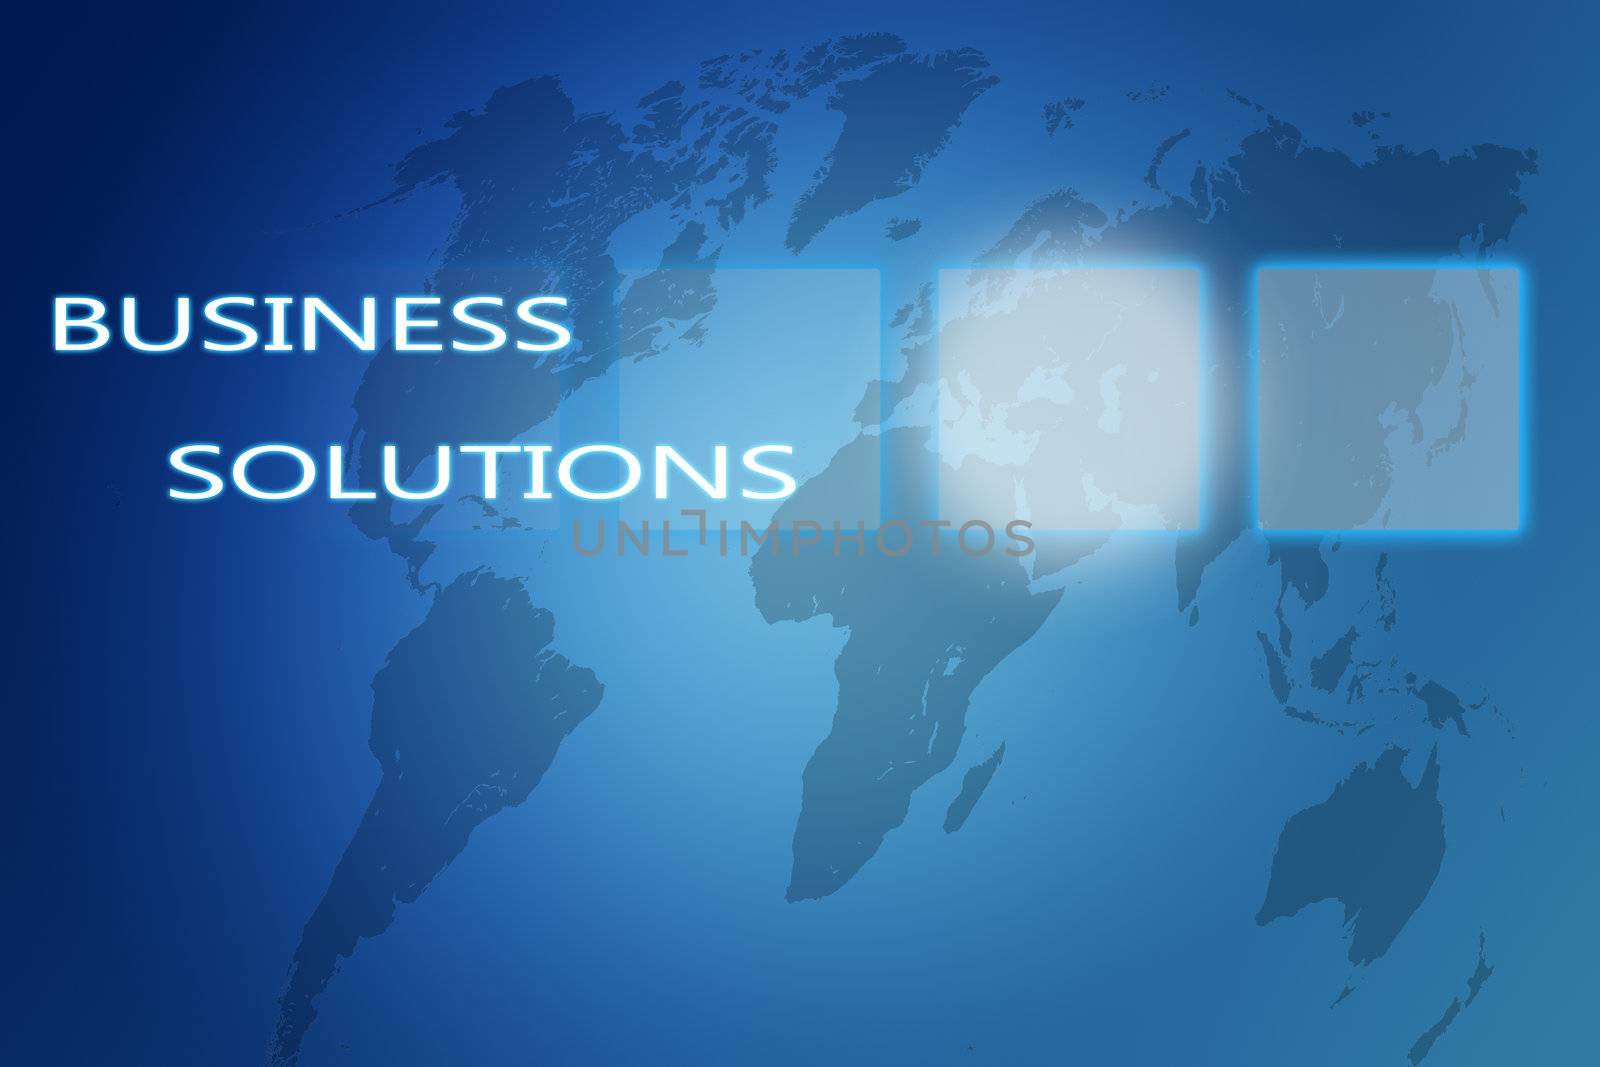 Business Solutions concept Illustration on Blue Background with world map